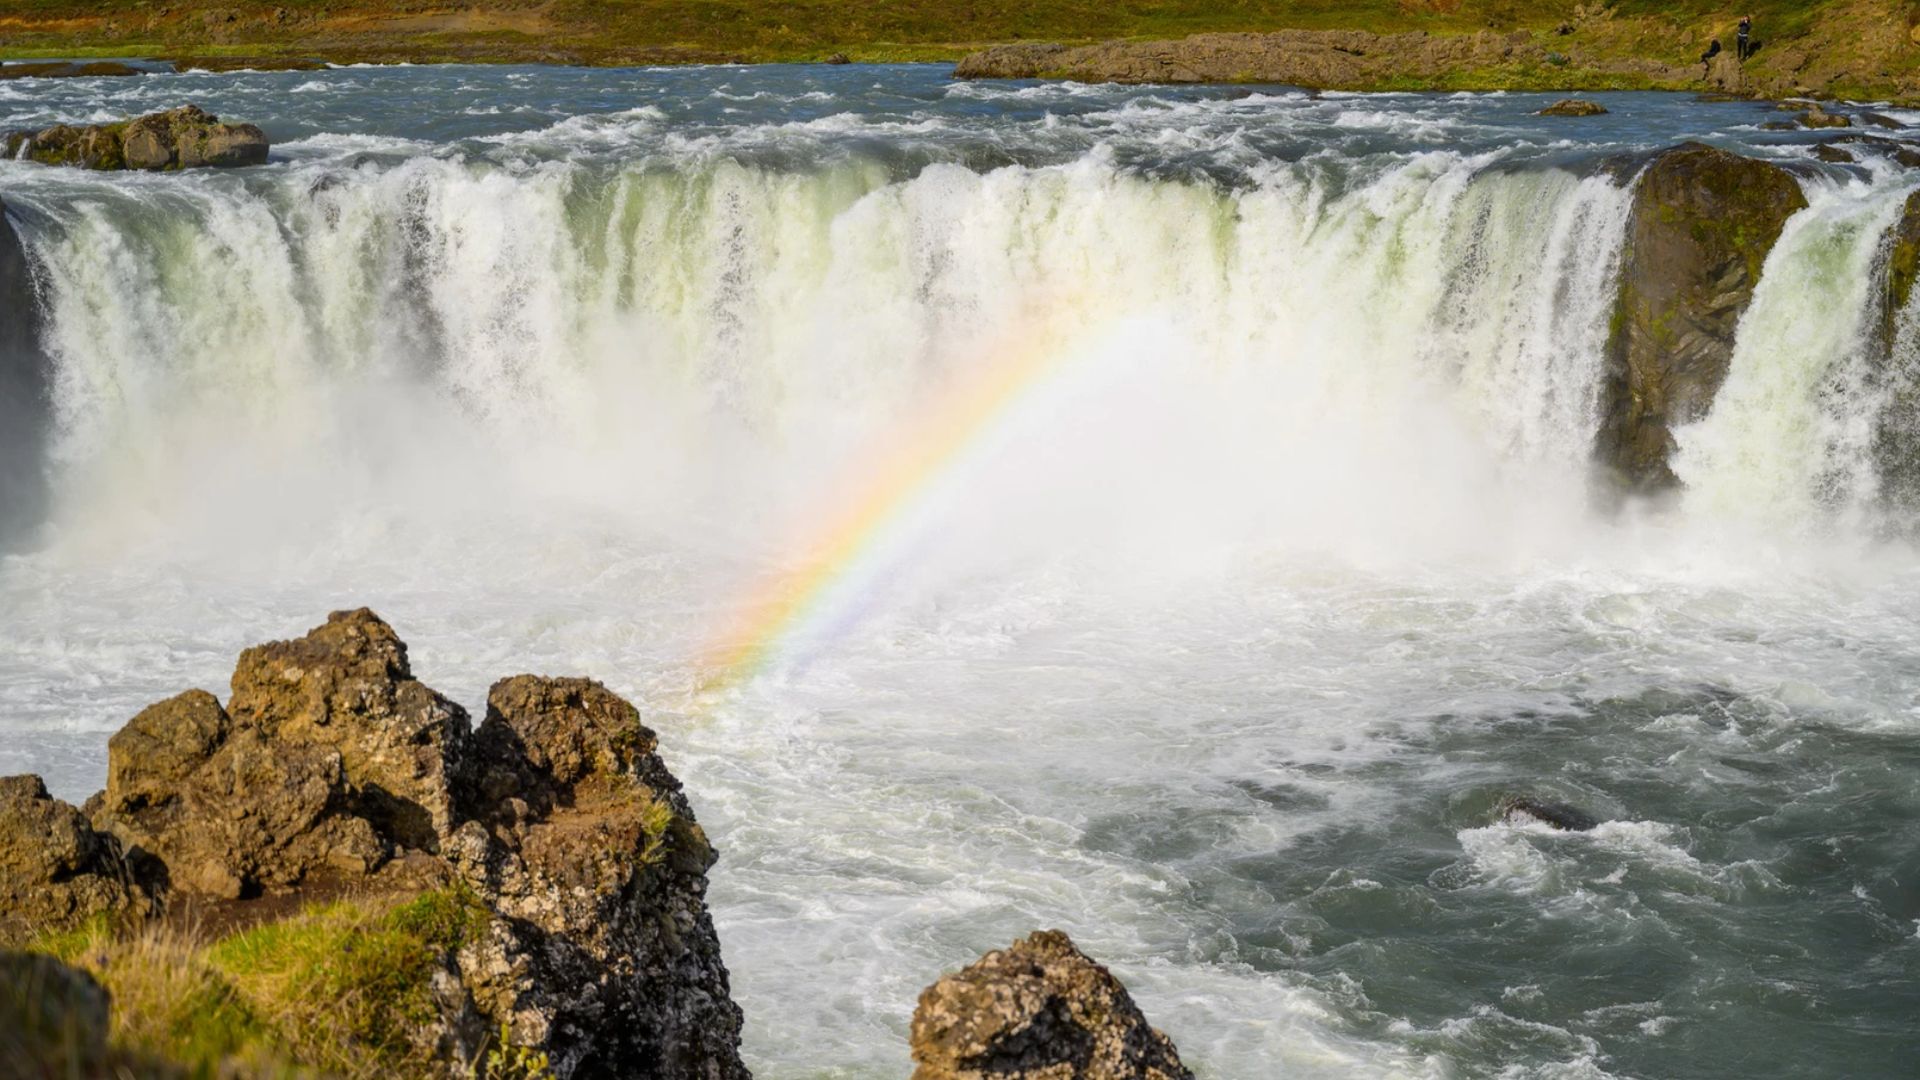 Godafoss waterfall with rainbow in North Iceland